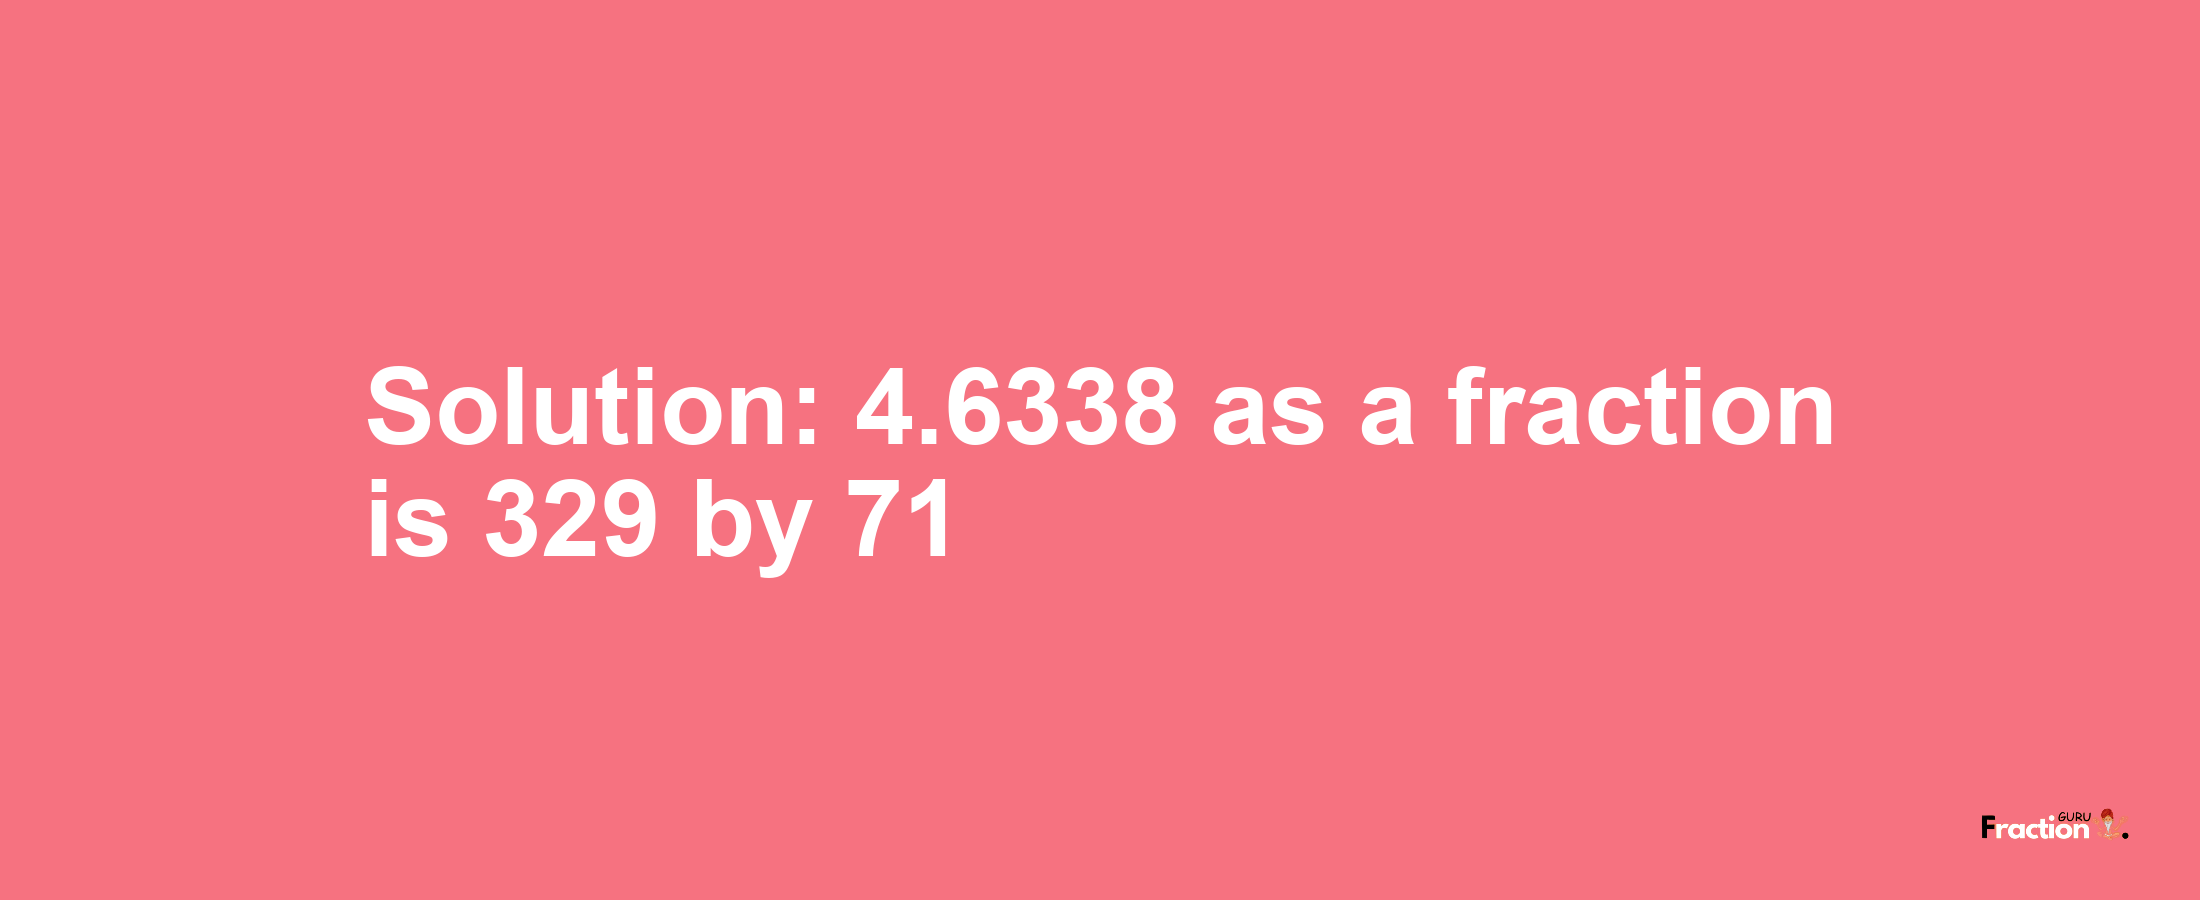 Solution:4.6338 as a fraction is 329/71